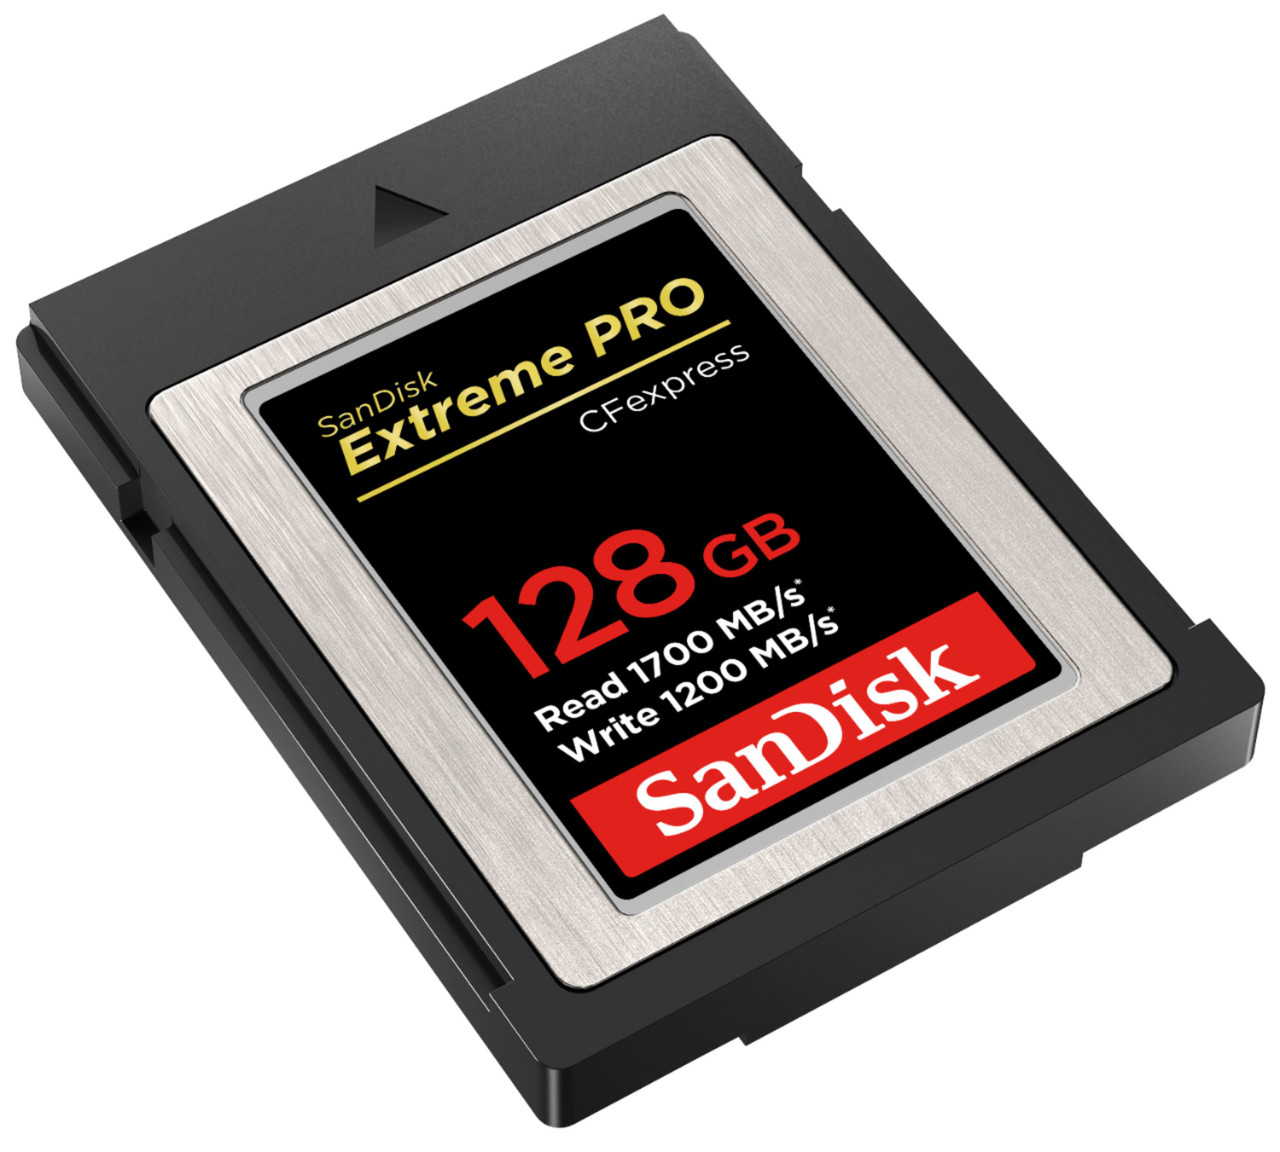 SanDisk - 128GB Extreme PRO CFexpress Memory Card